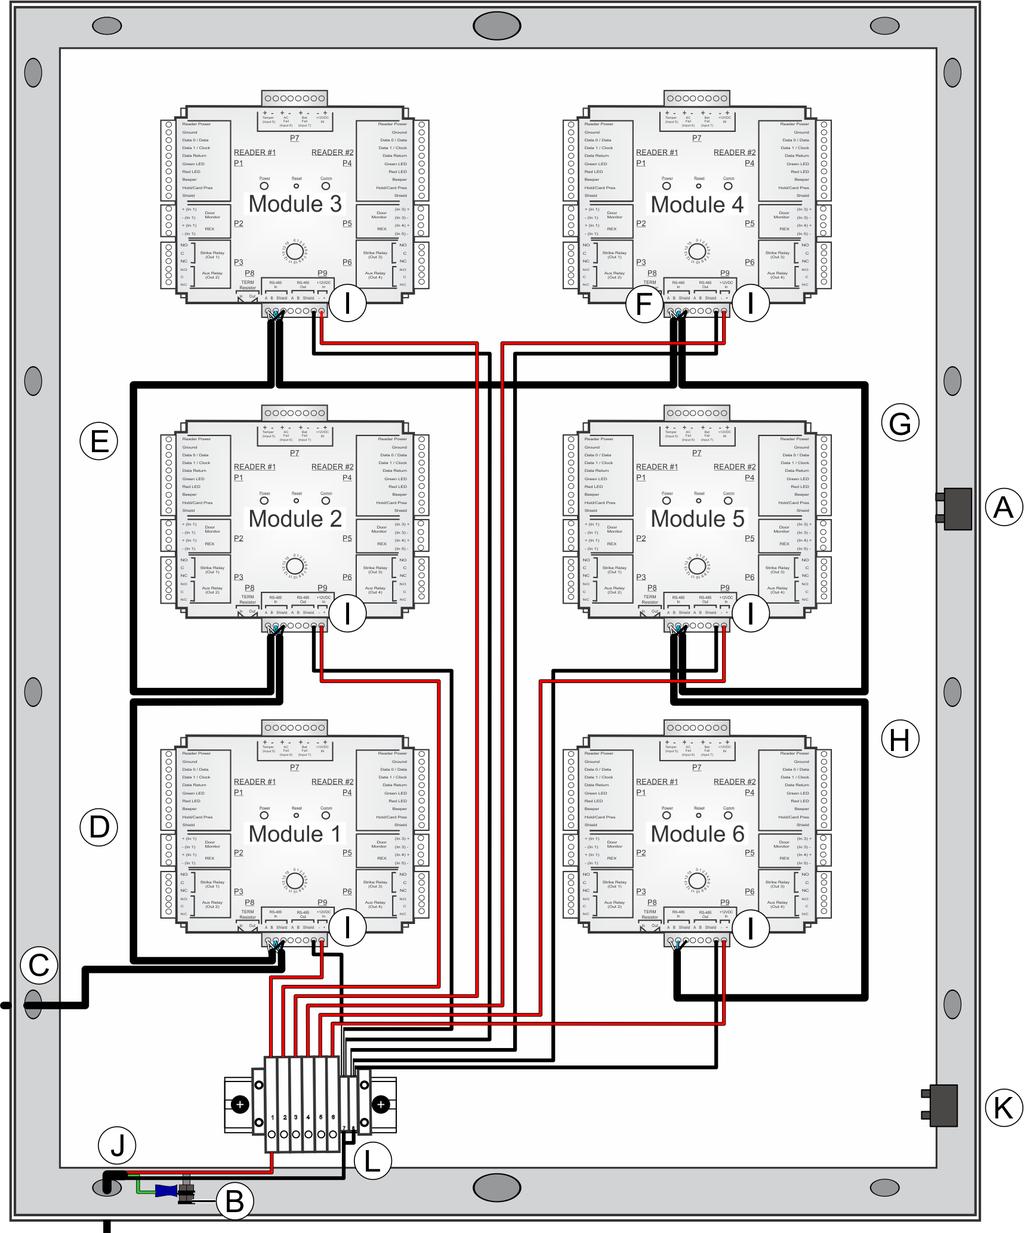 Synergis enclosure wiring Function From location To location Wire information A Door tamper signal Door tamper